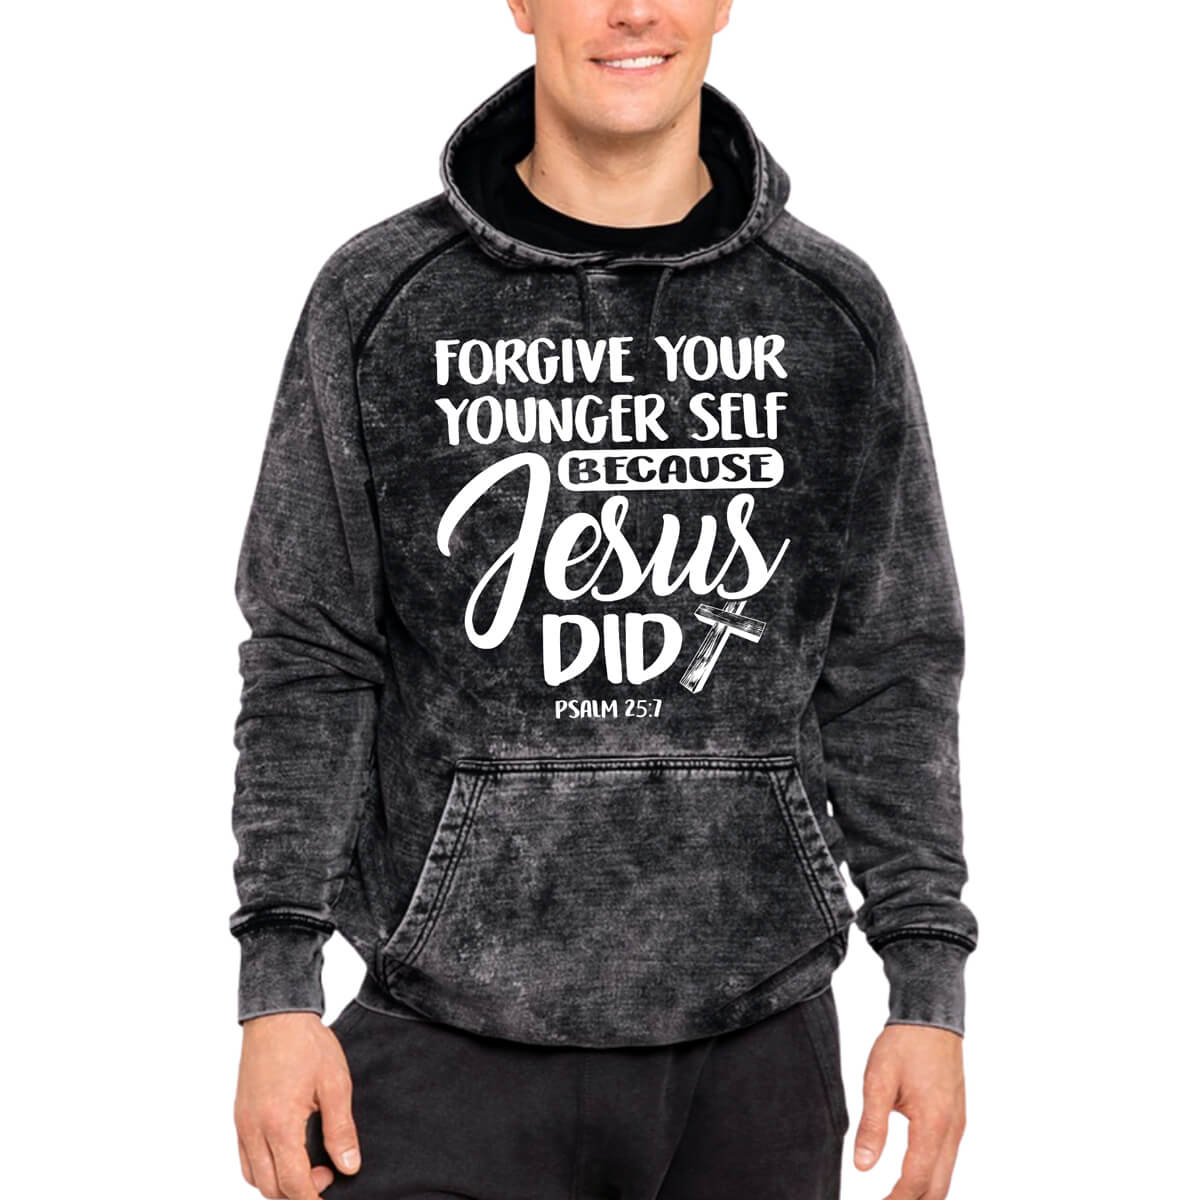 Forgive Your Younger Self Because Jesus Did Mineral Wash Men's Sweatshirt Hoodie